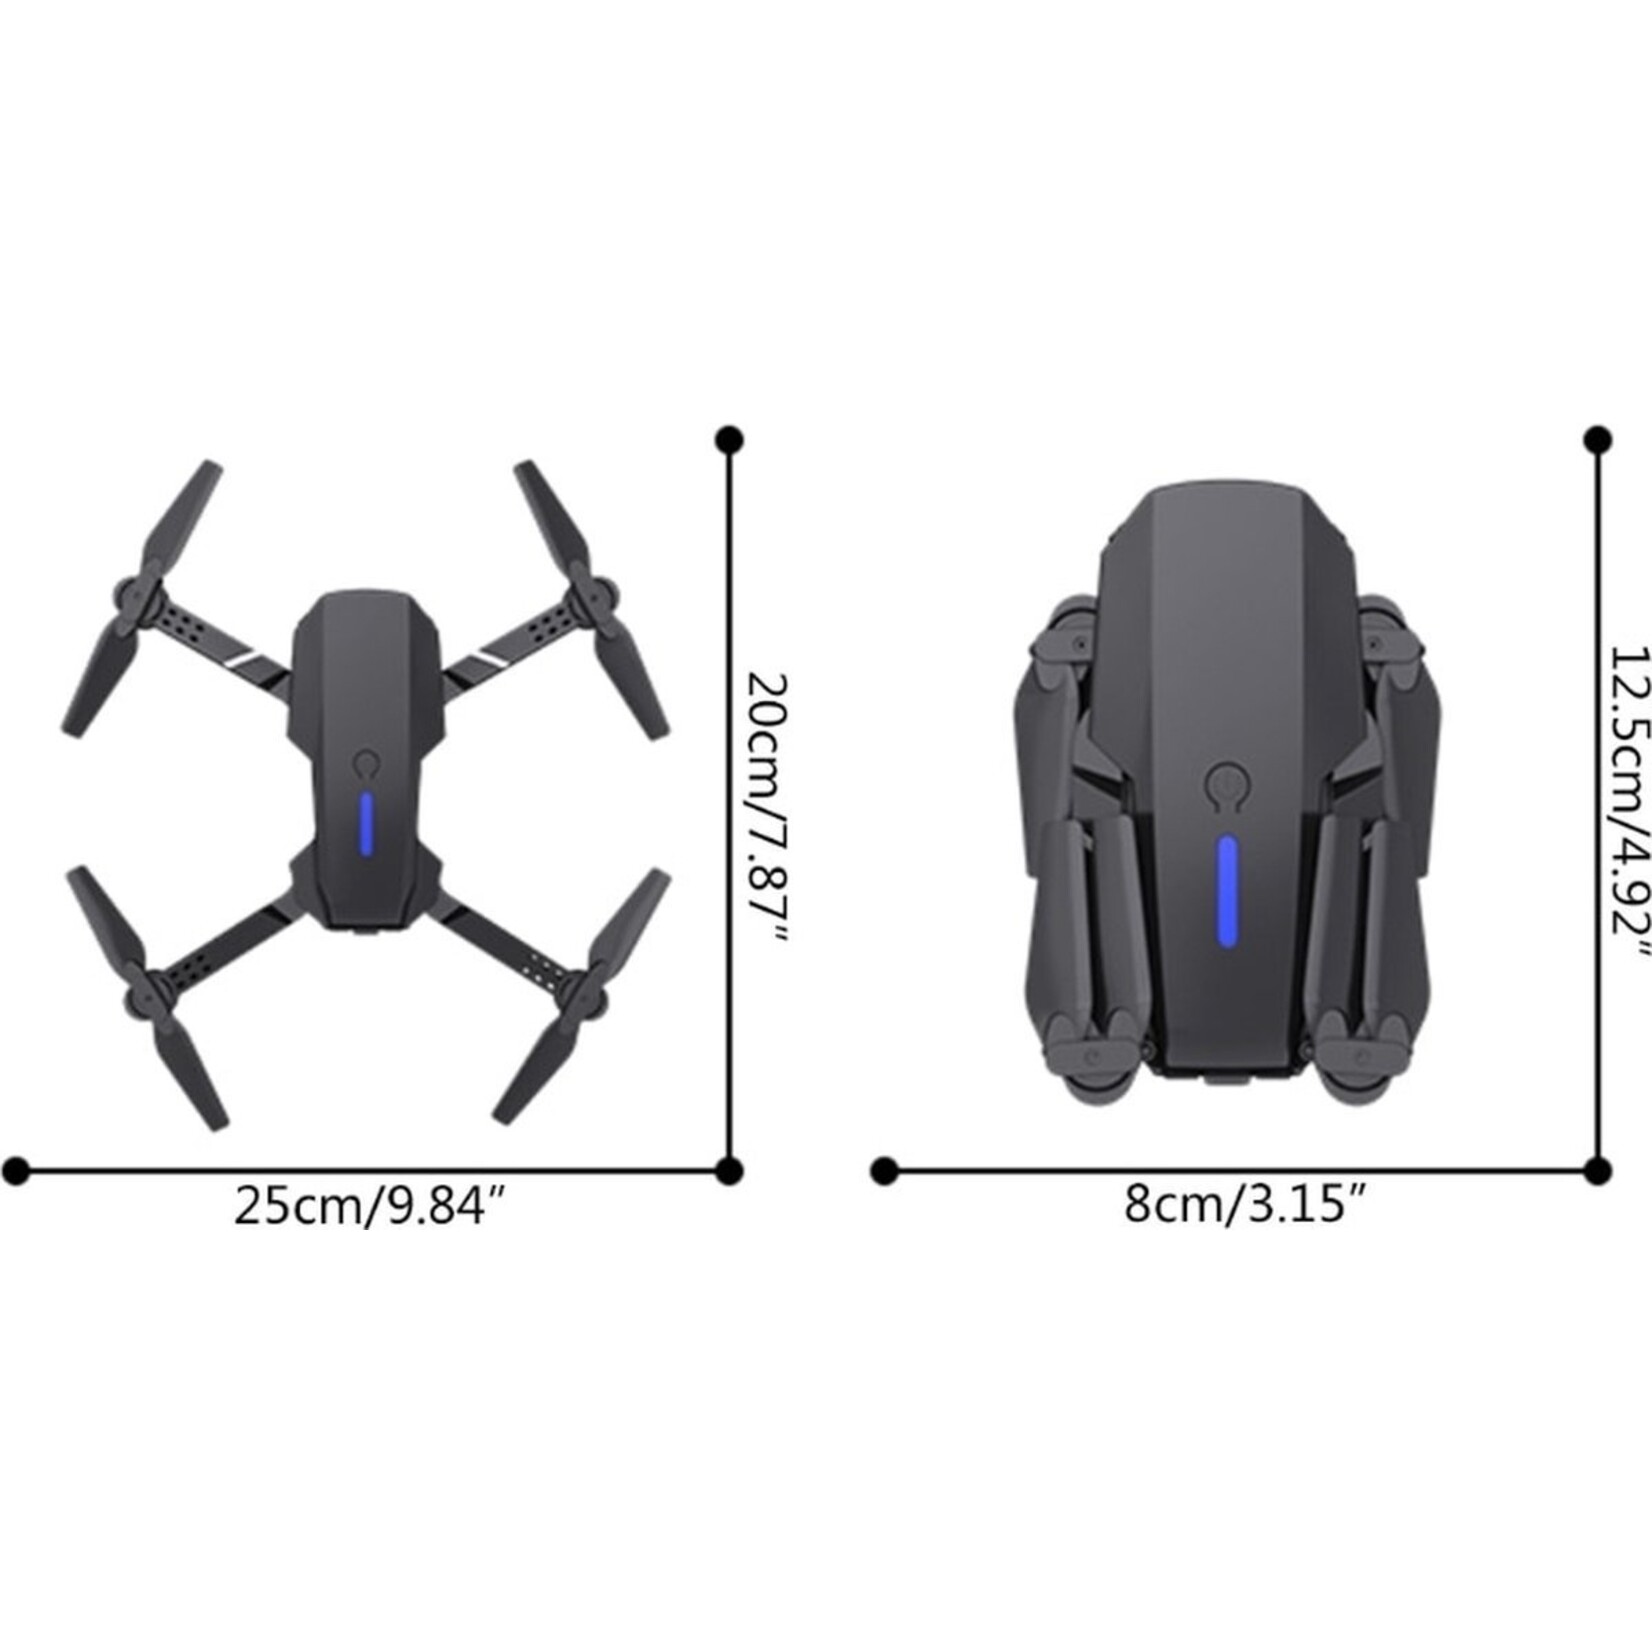 Quad Drone with camera and storage bag - full HD camera - with 2 batteries